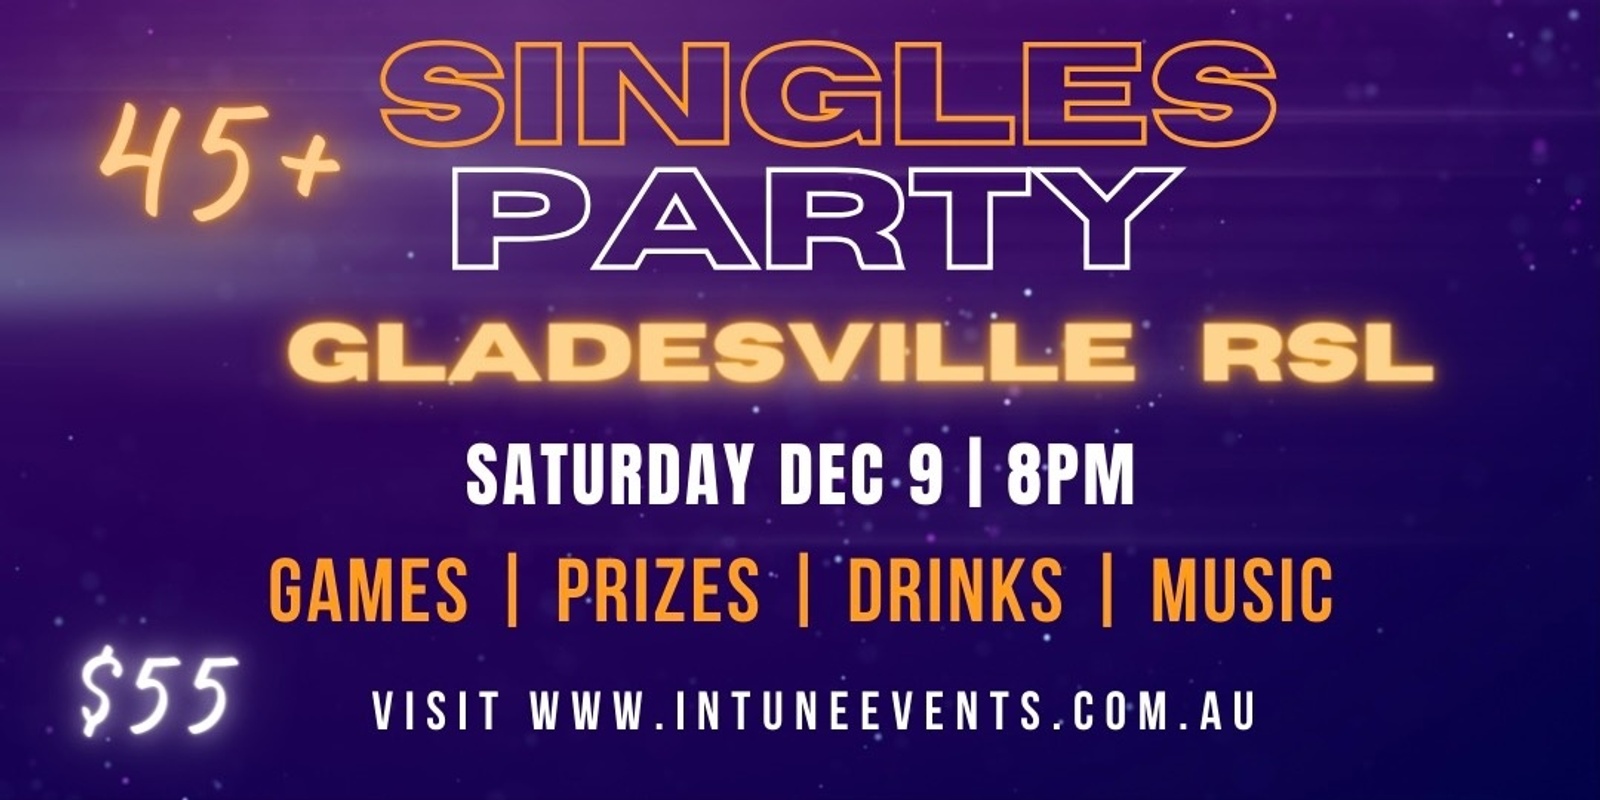 Banner image for 45+ Singles Party - Gladesville RSL